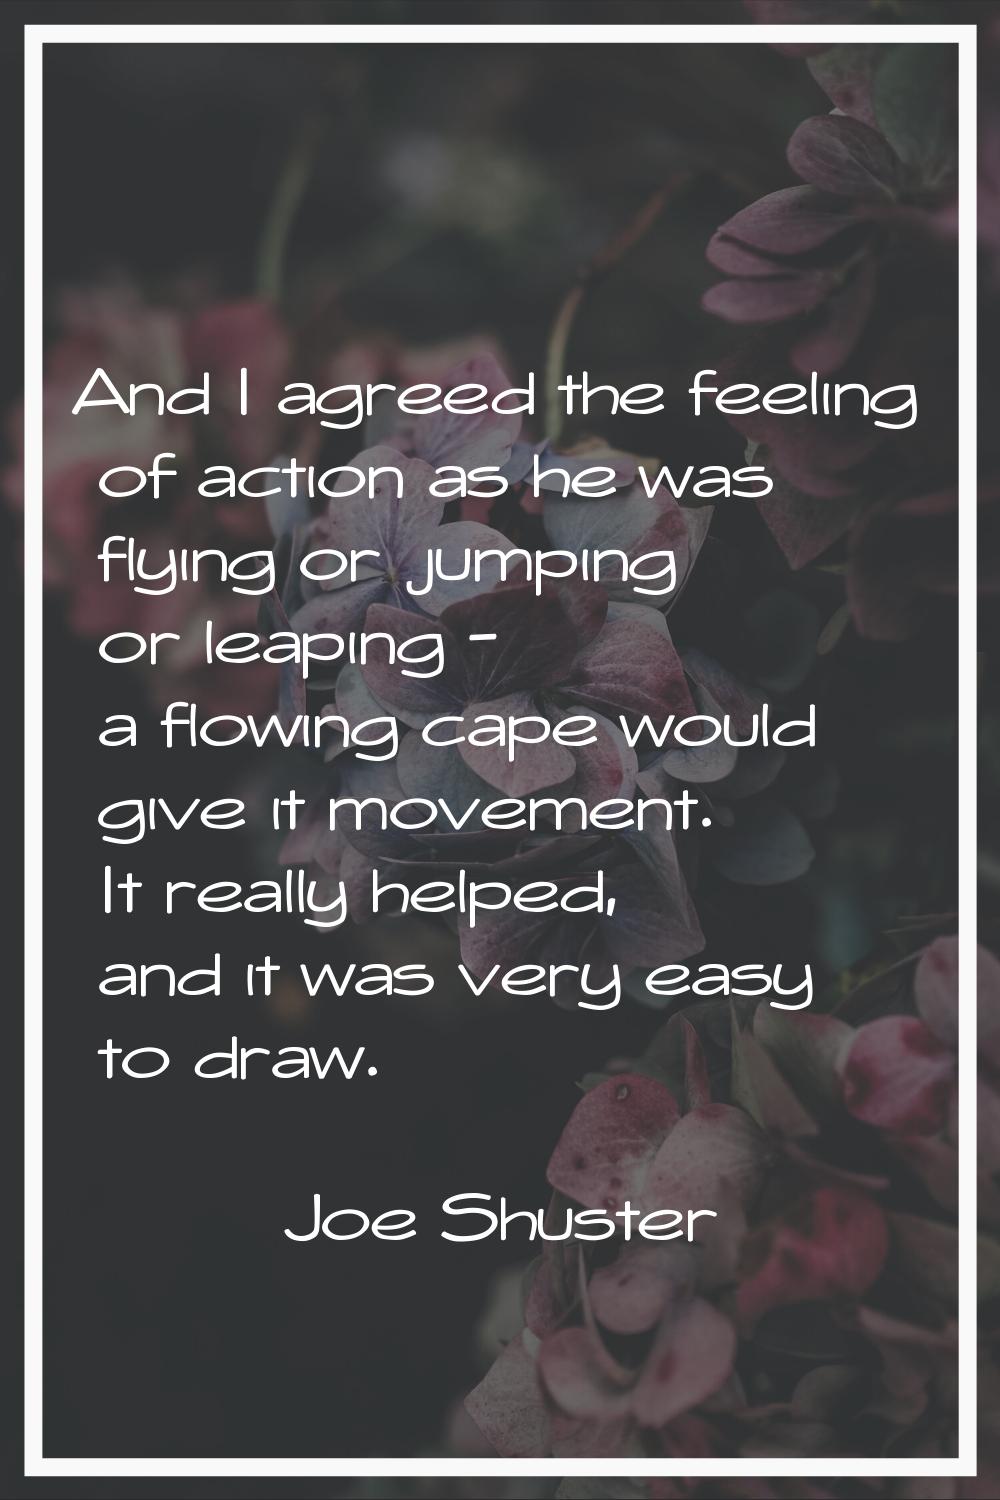 And I agreed the feeling of action as he was flying or jumping or leaping - a flowing cape would gi